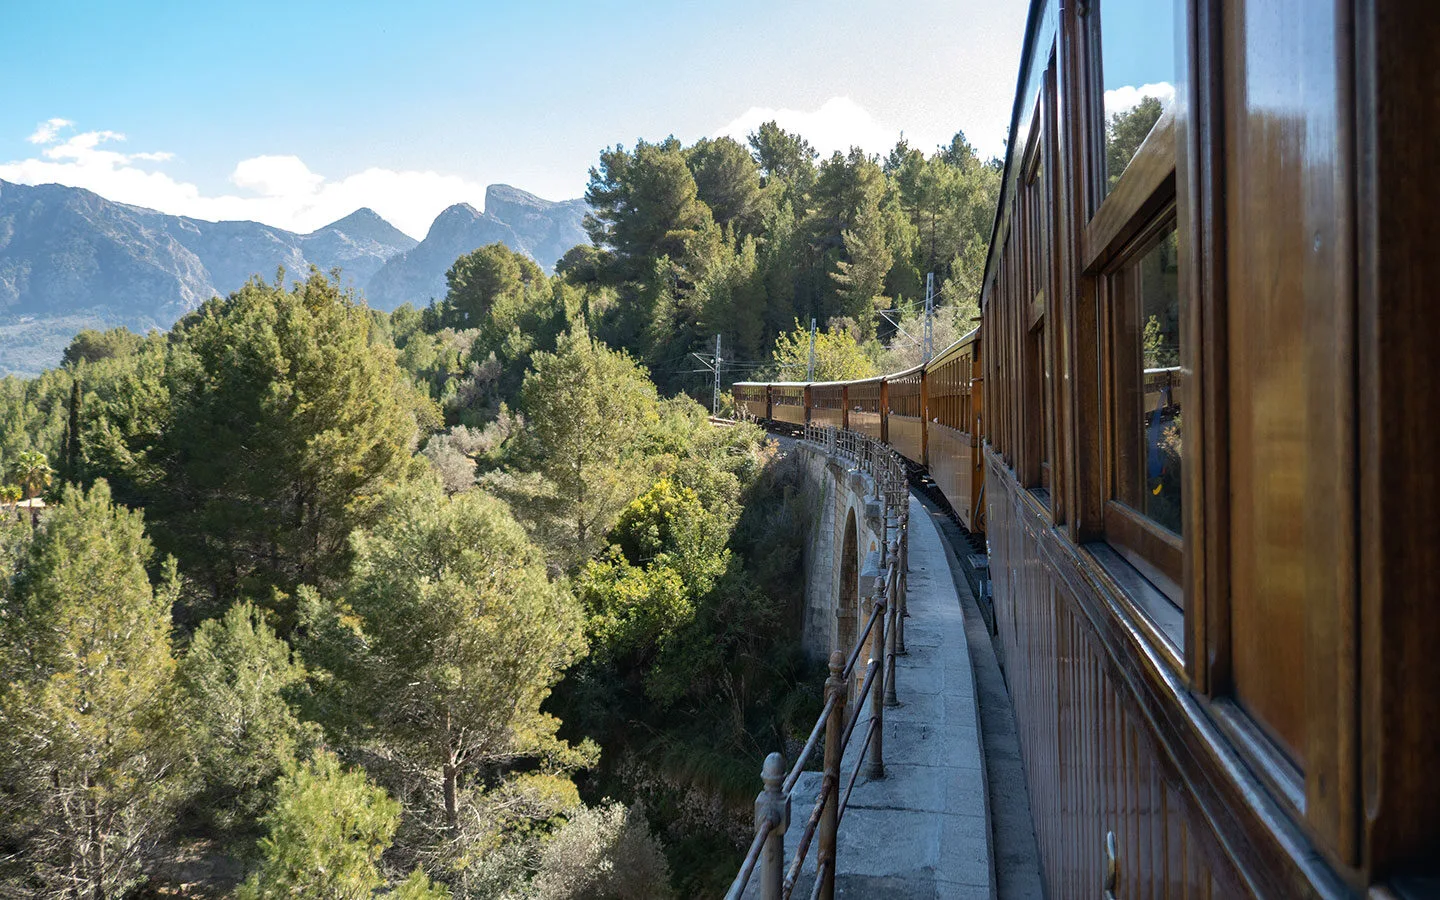 The train from Palma to Soller crossing the viaduct over the Torrent dels Montreals